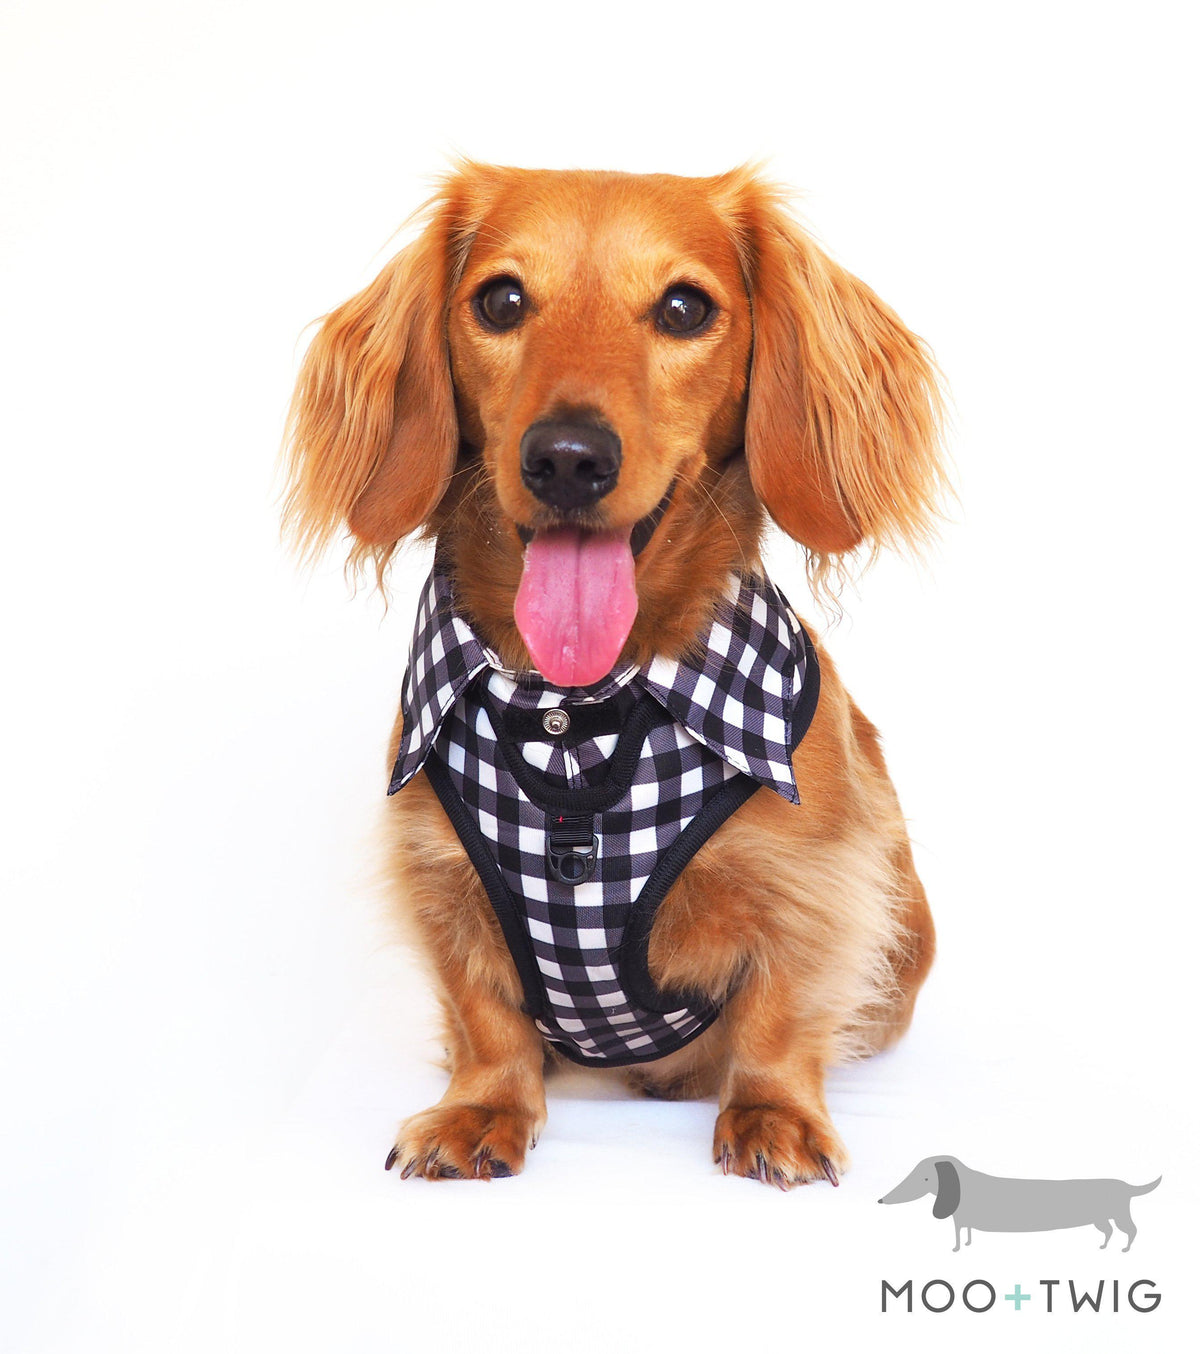 Dachshund Dog wearing Dog Harness Shirt with Gingham Print and Red Bow Tie. Work and wedding outfit for dogs. Designed in Australia.